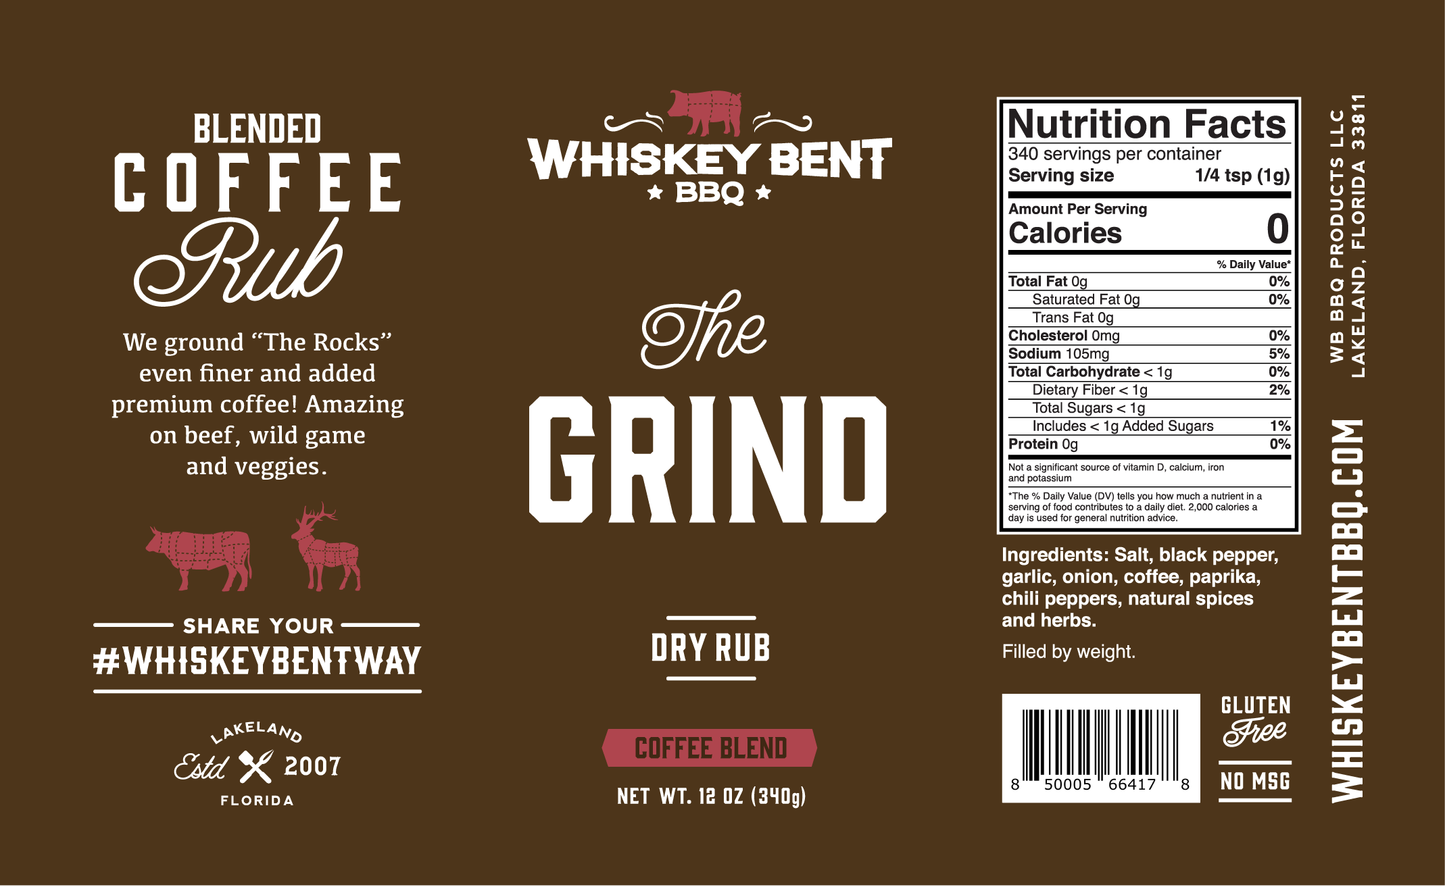 The Grind - Coffee Blend